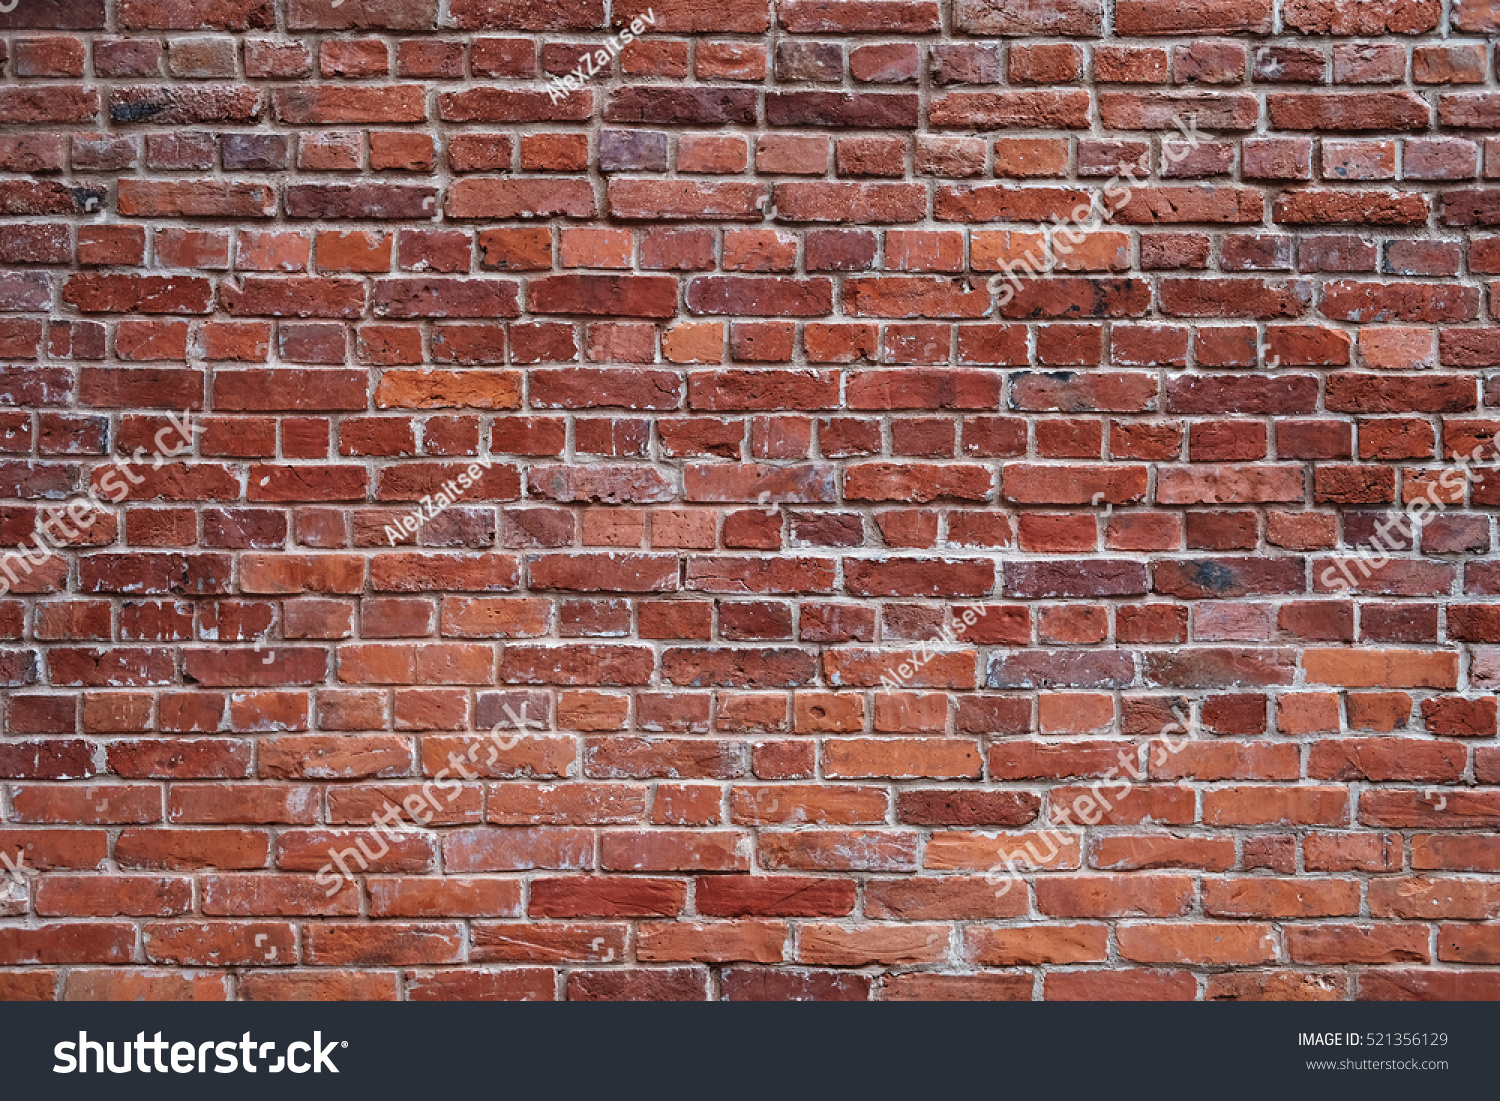  old red brick wall texture background #521356129